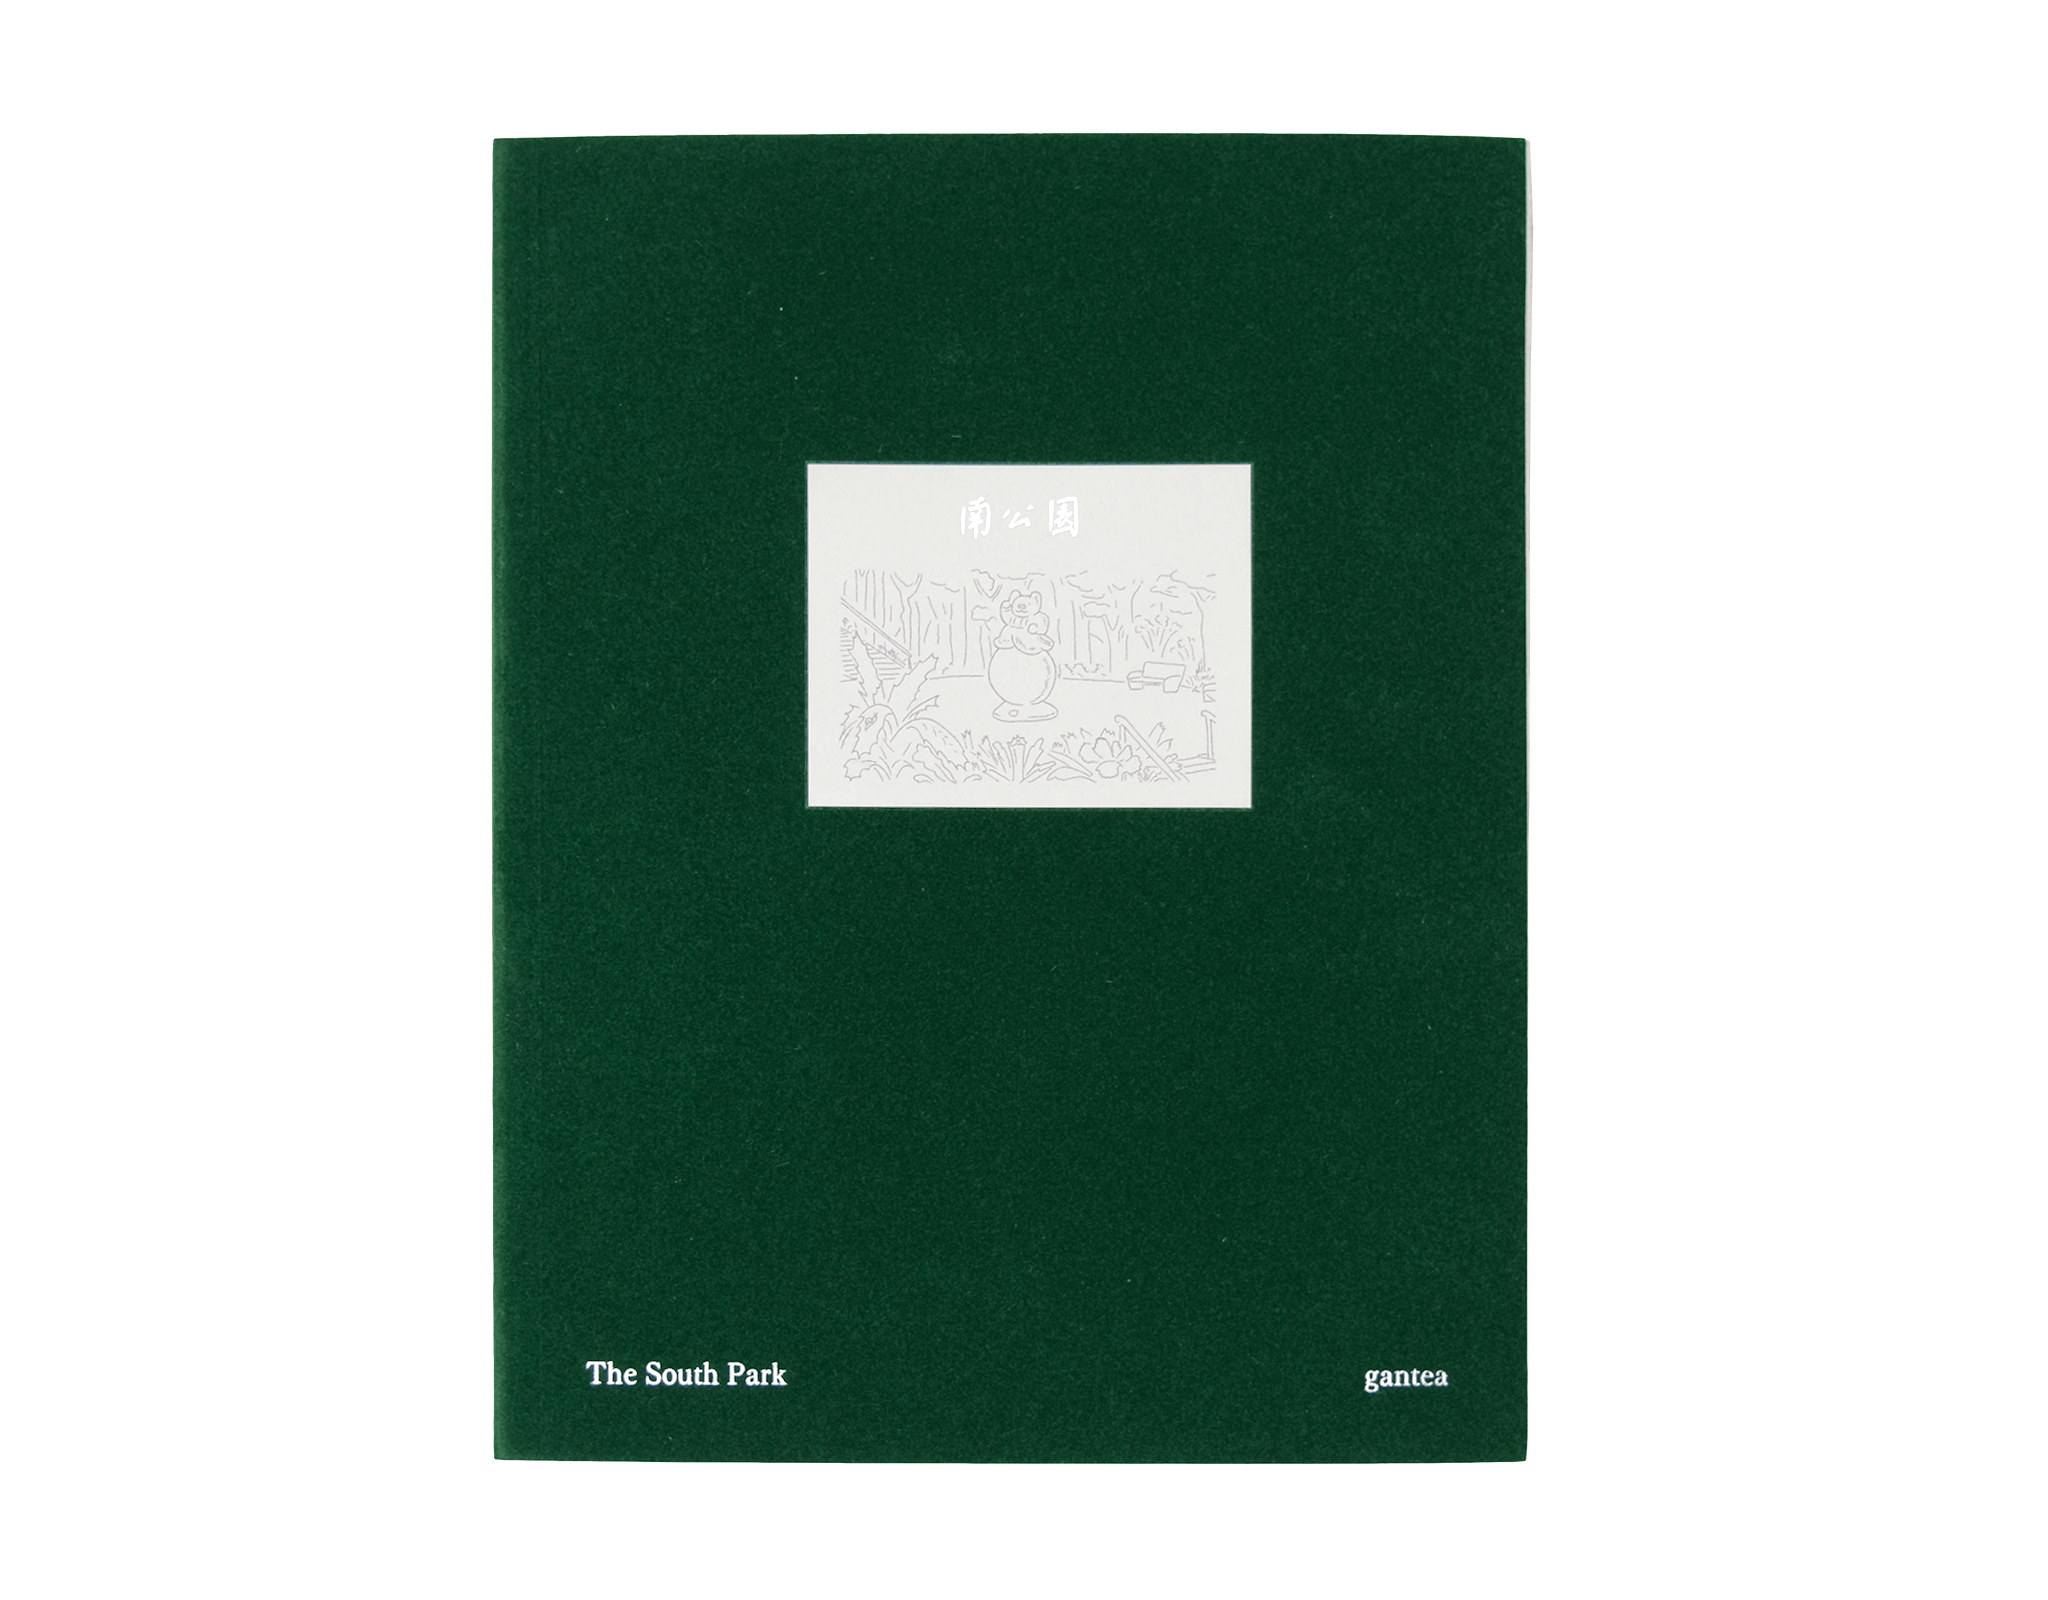 The velvety dark green cover, with a tiny reflective illustration of a scene from the park right in the center. 